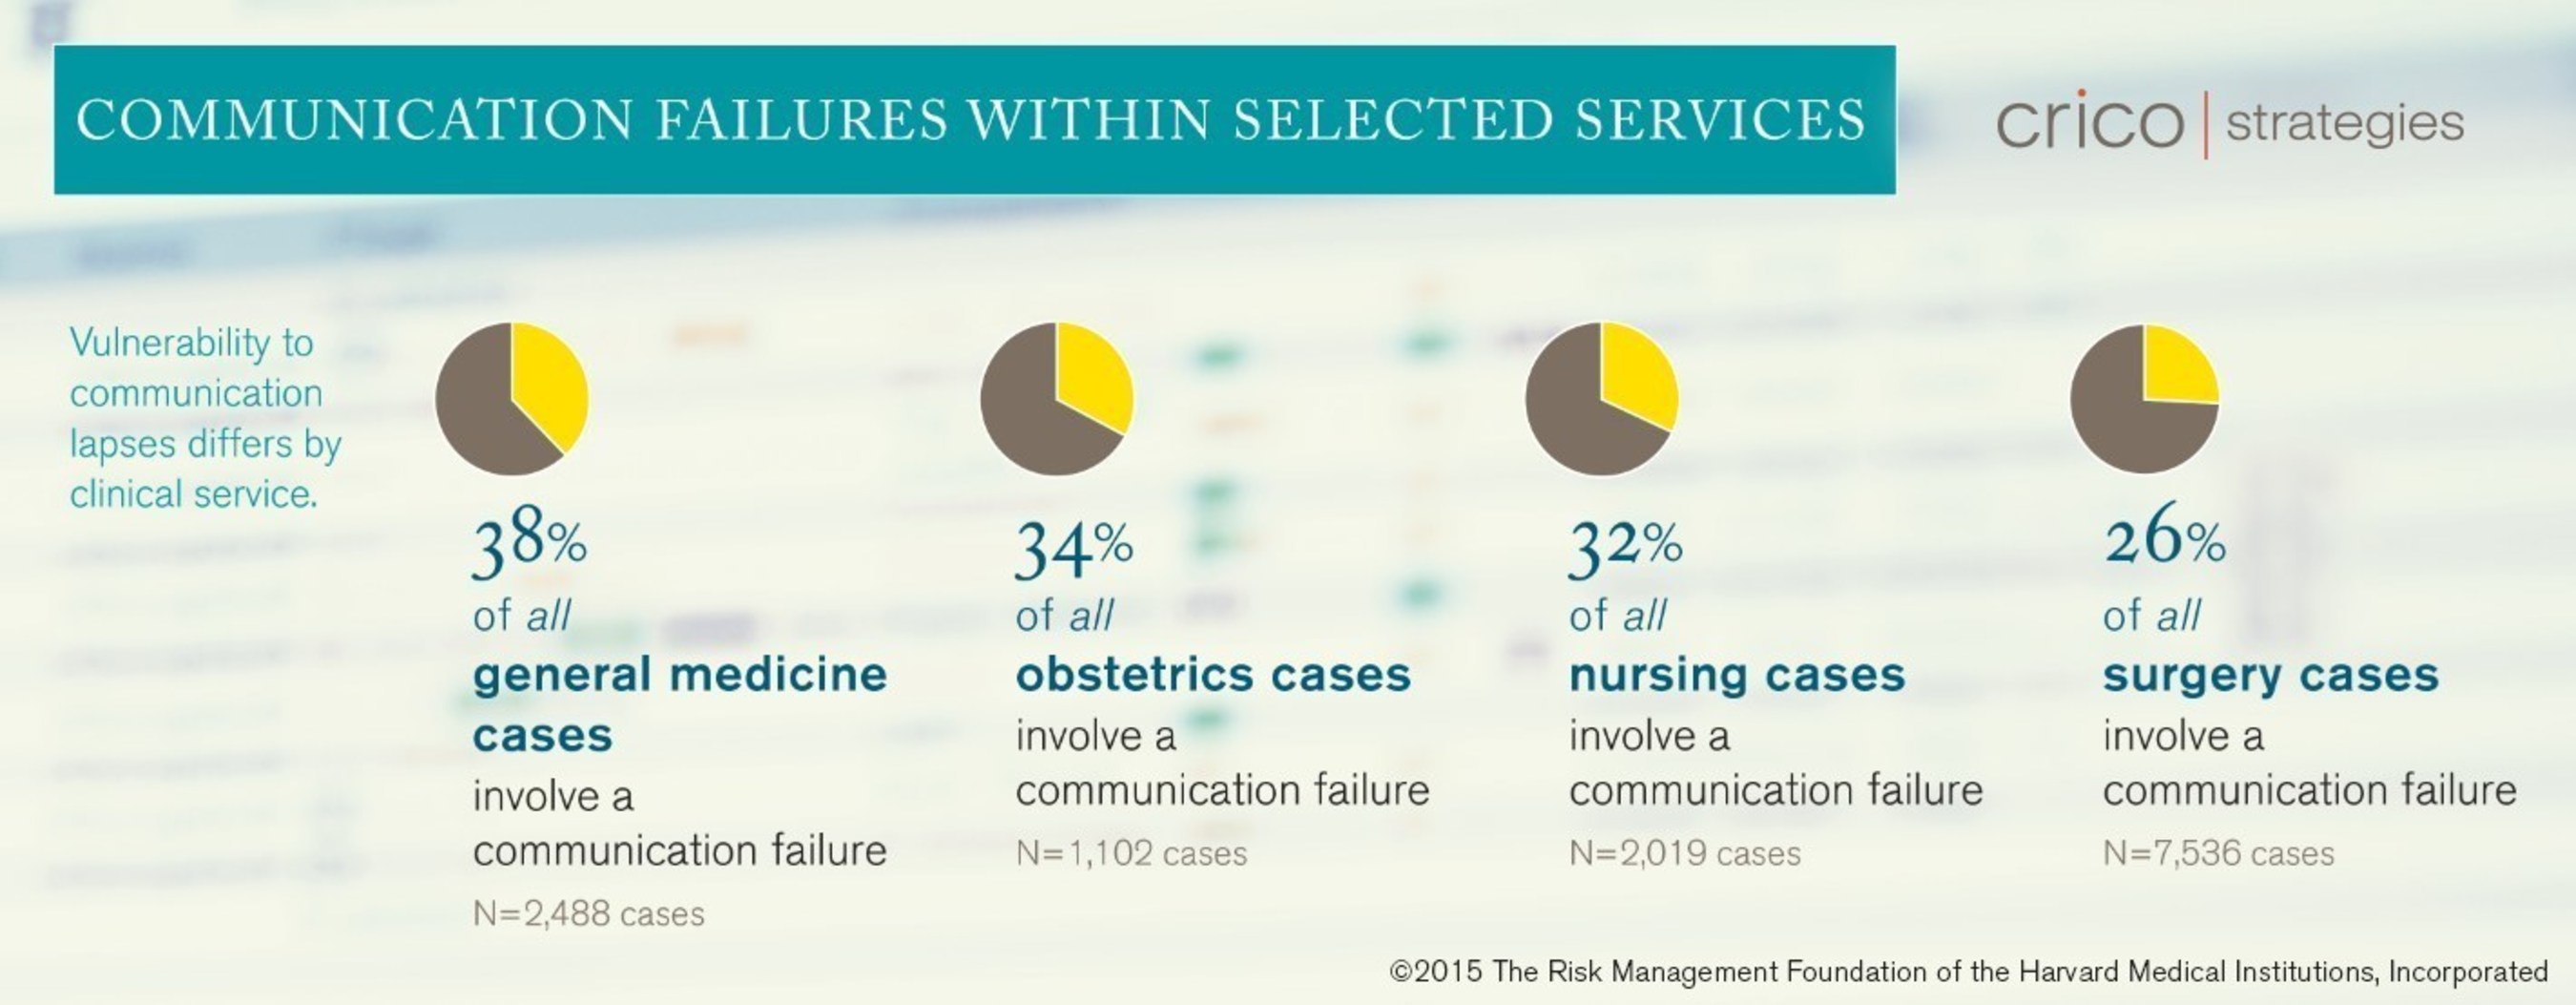 Communication failures within selected services (general medicine, obstetrics, nursing, surgery). Source: CRICO Strategies 2015 CBS Report: Malpractice Risks in Communication Failures.